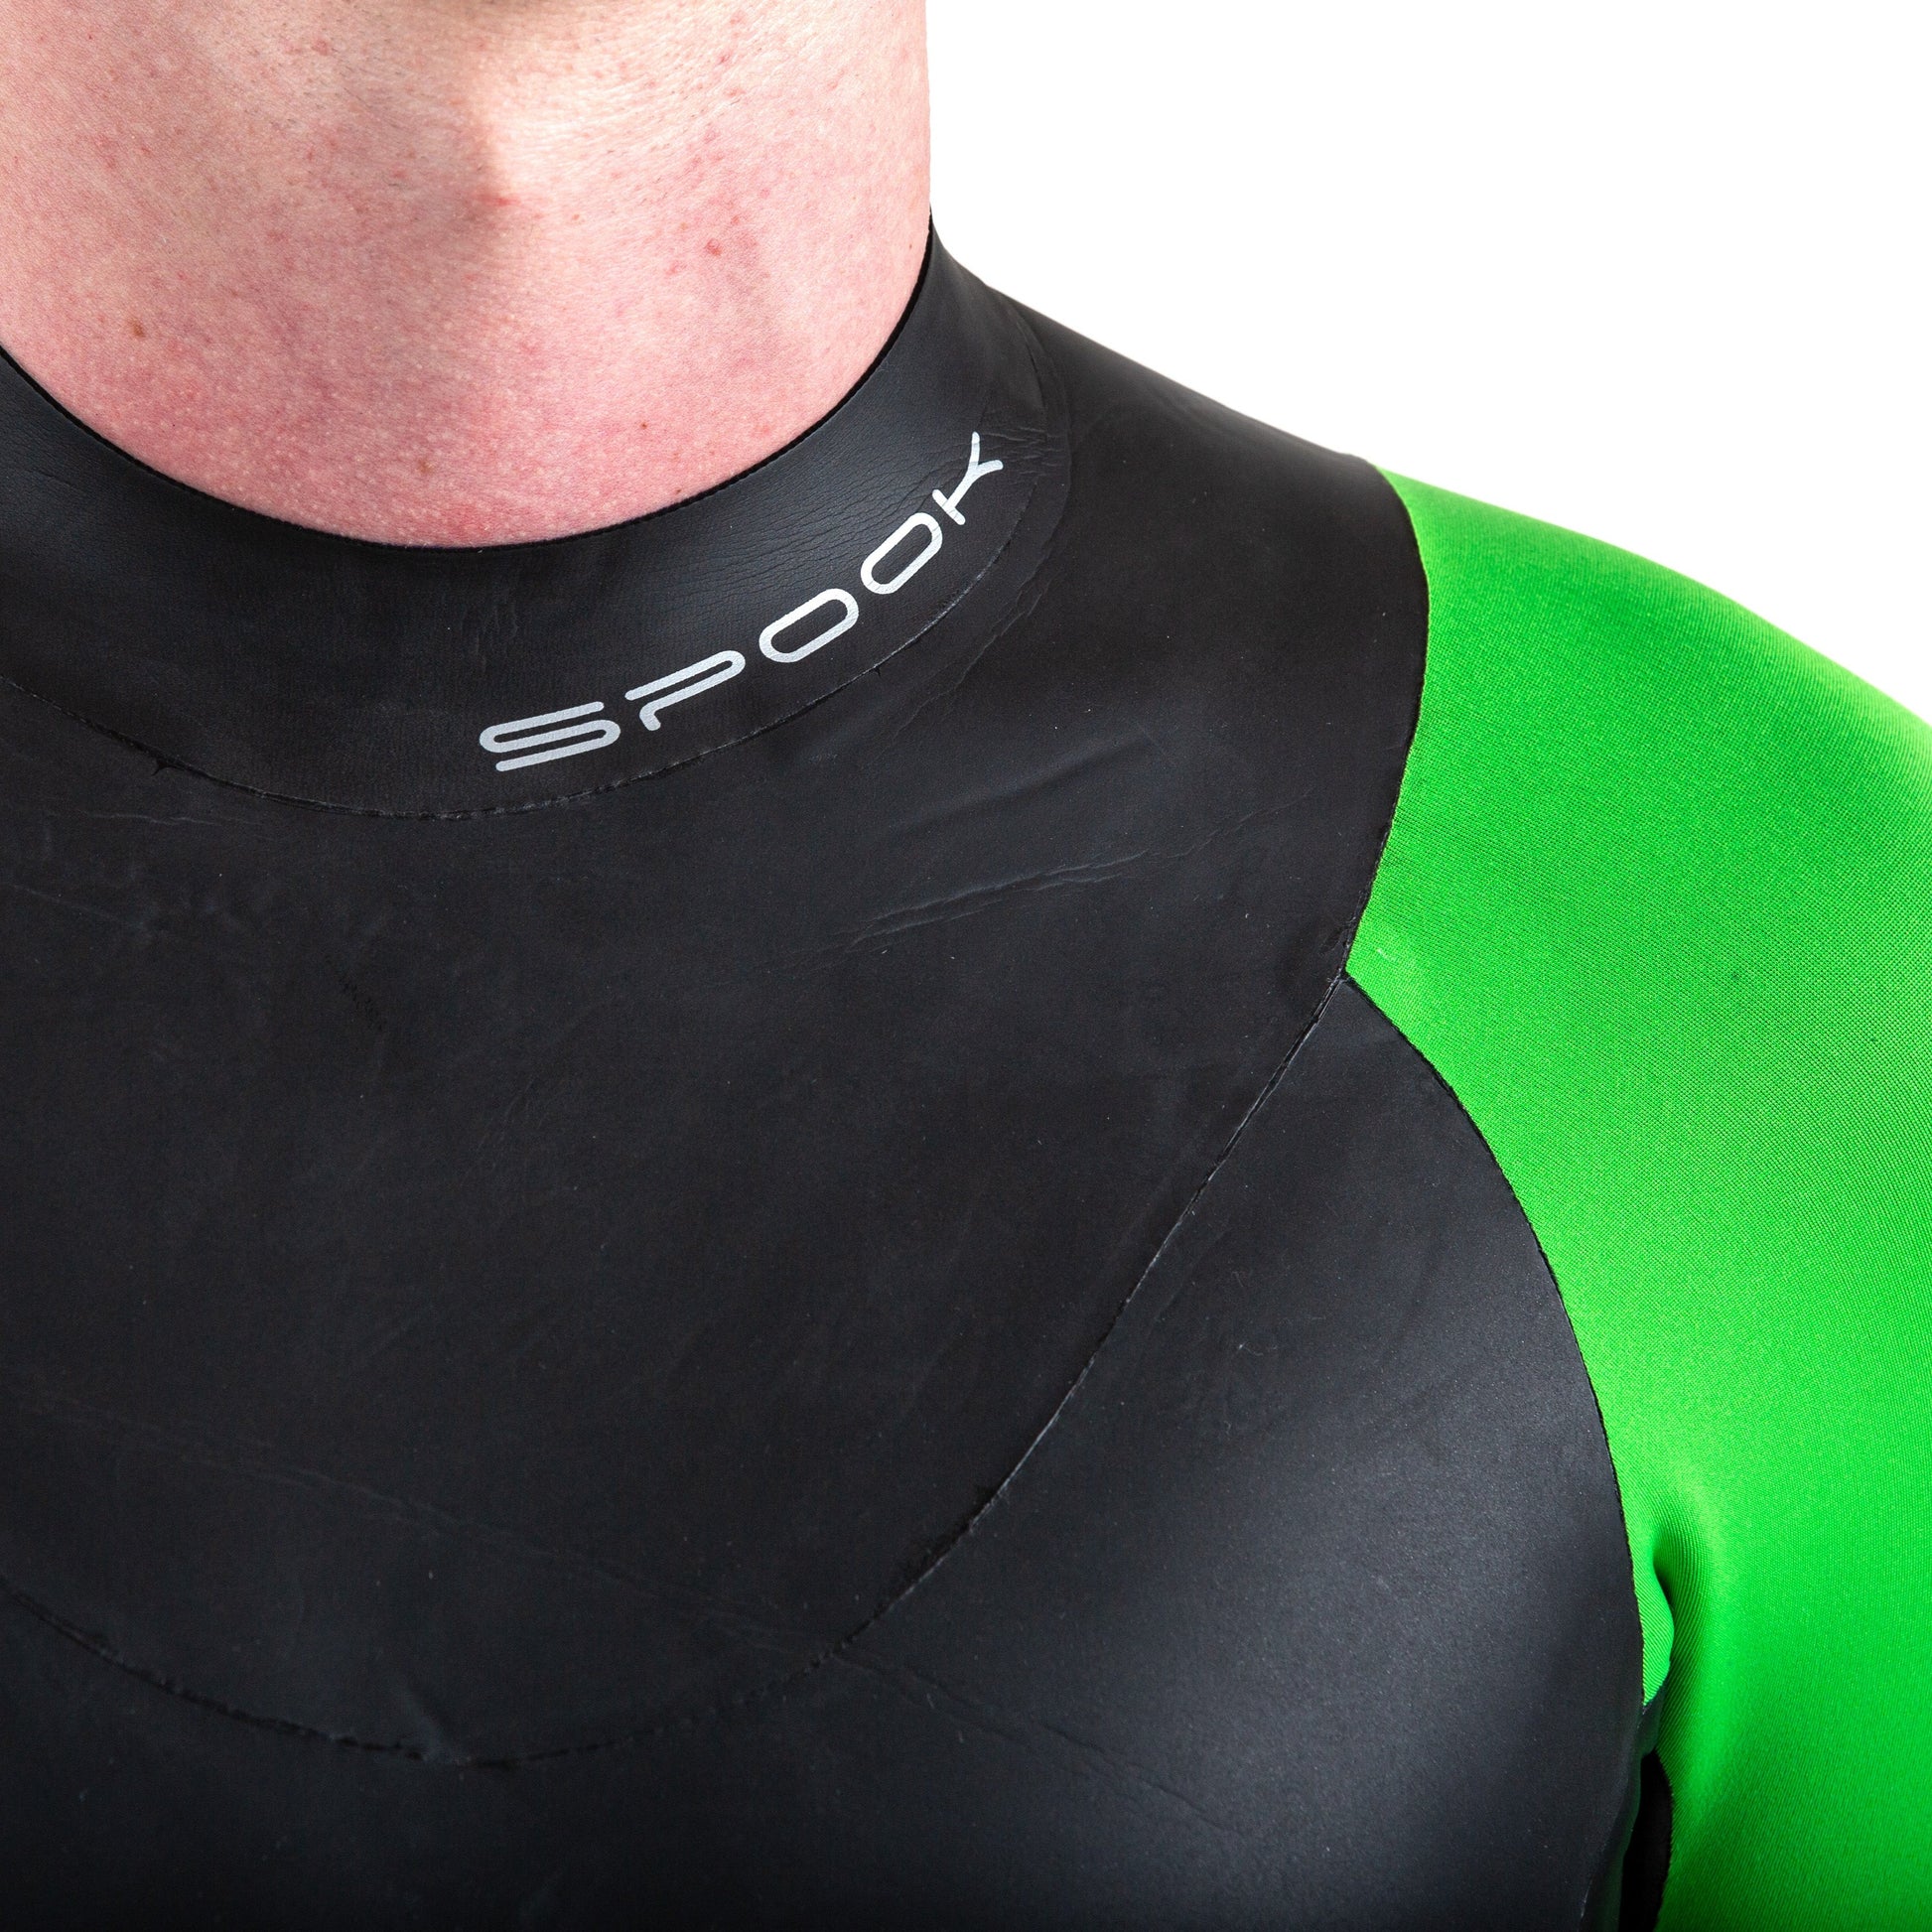 Close up of the neck area of a man in the Spook Wetsuit by Yonda. The perfect wetsuit for Open Water Swimming.